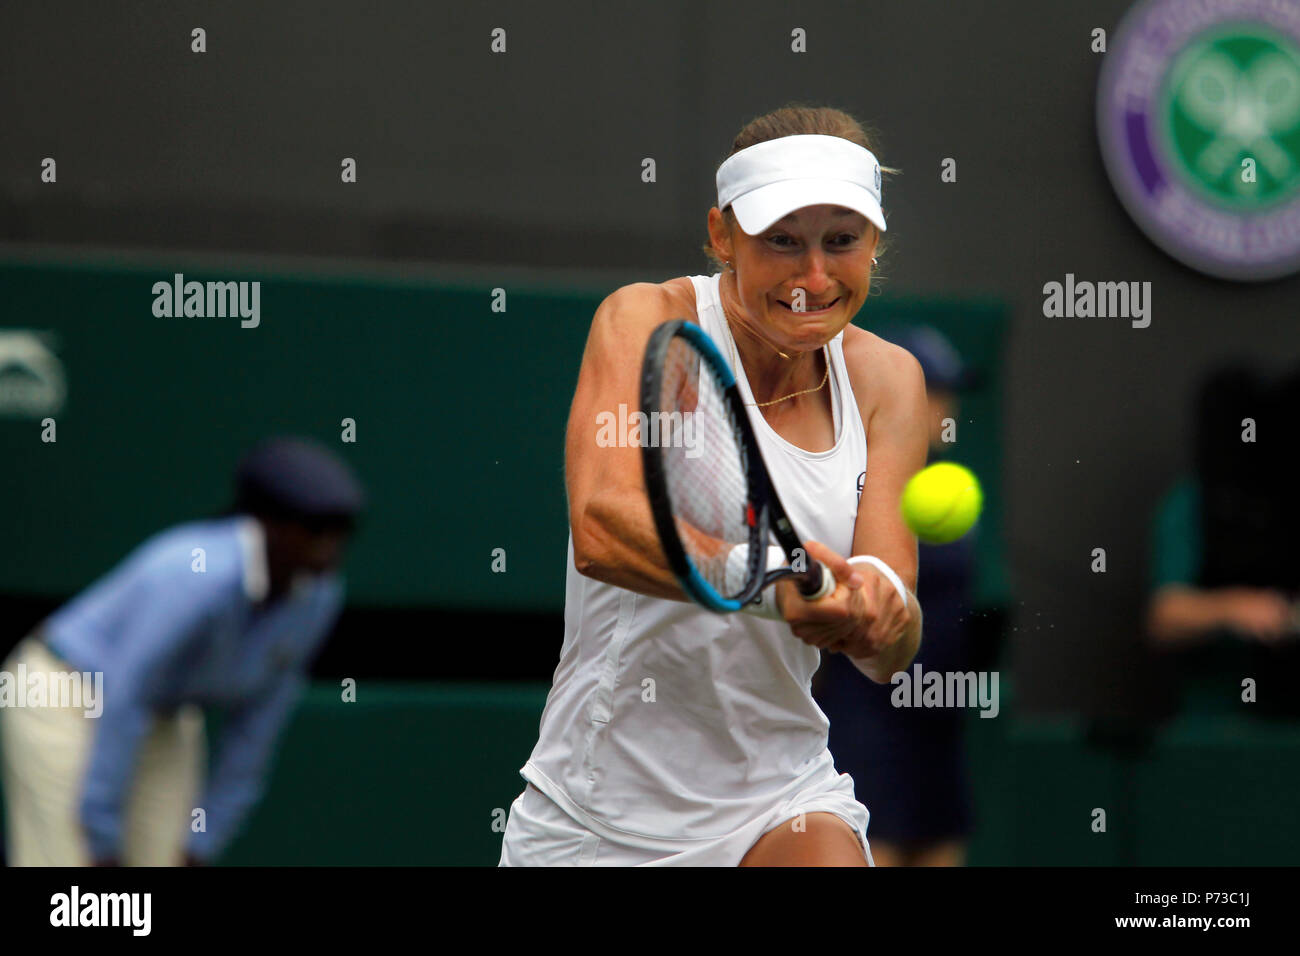 London, England - July 4th, 2018.  Wimbledon Tennis:  Ekaterina Makarova of Russia during her match against Number 2 seed Caroline Wozniacki of Denmark in the second round at Wimbledon today. Credit: Adam Stoltman/Alamy Live News Stock Photo